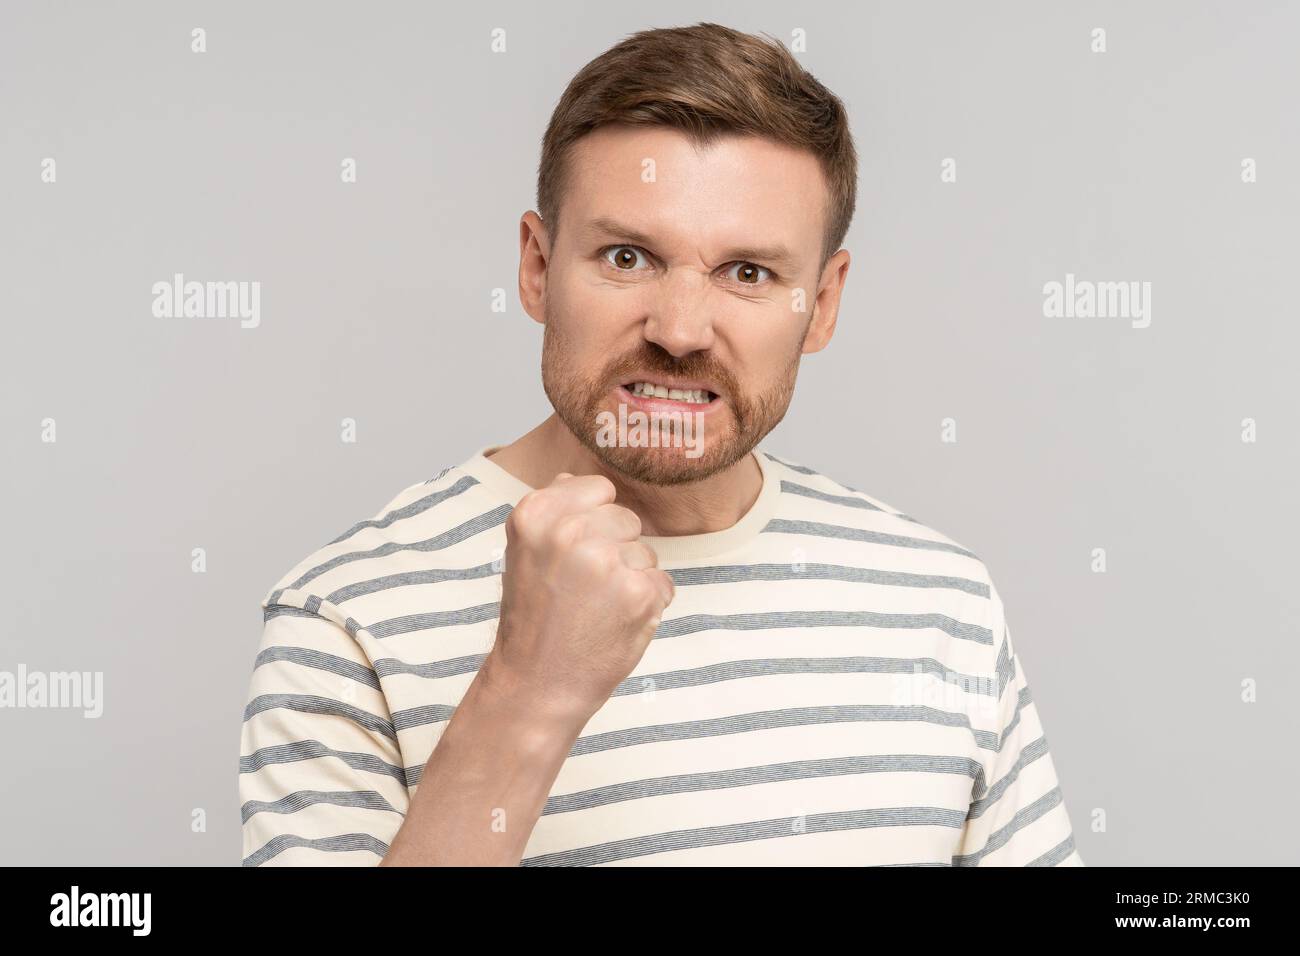 Angry aggressive middle aged man clenched fist has evil face looking at camera on grey background. Stock Photo